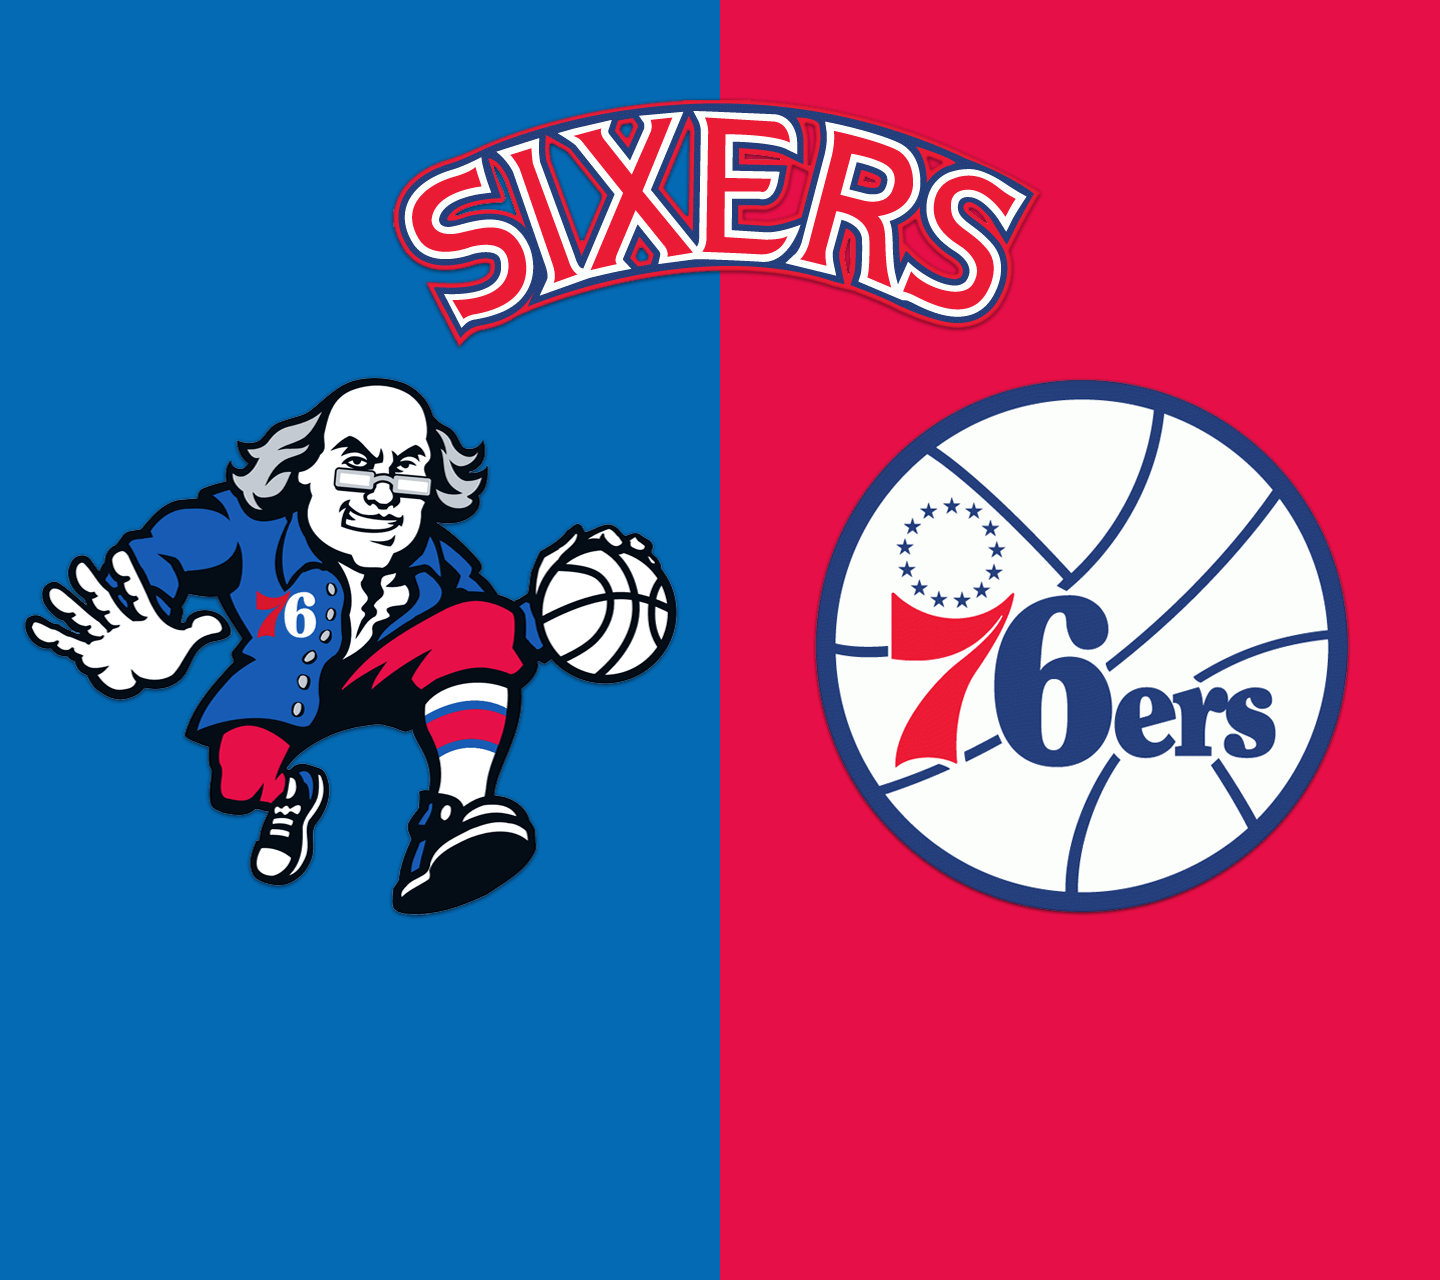 Sixers wallpaper for Android (720p)